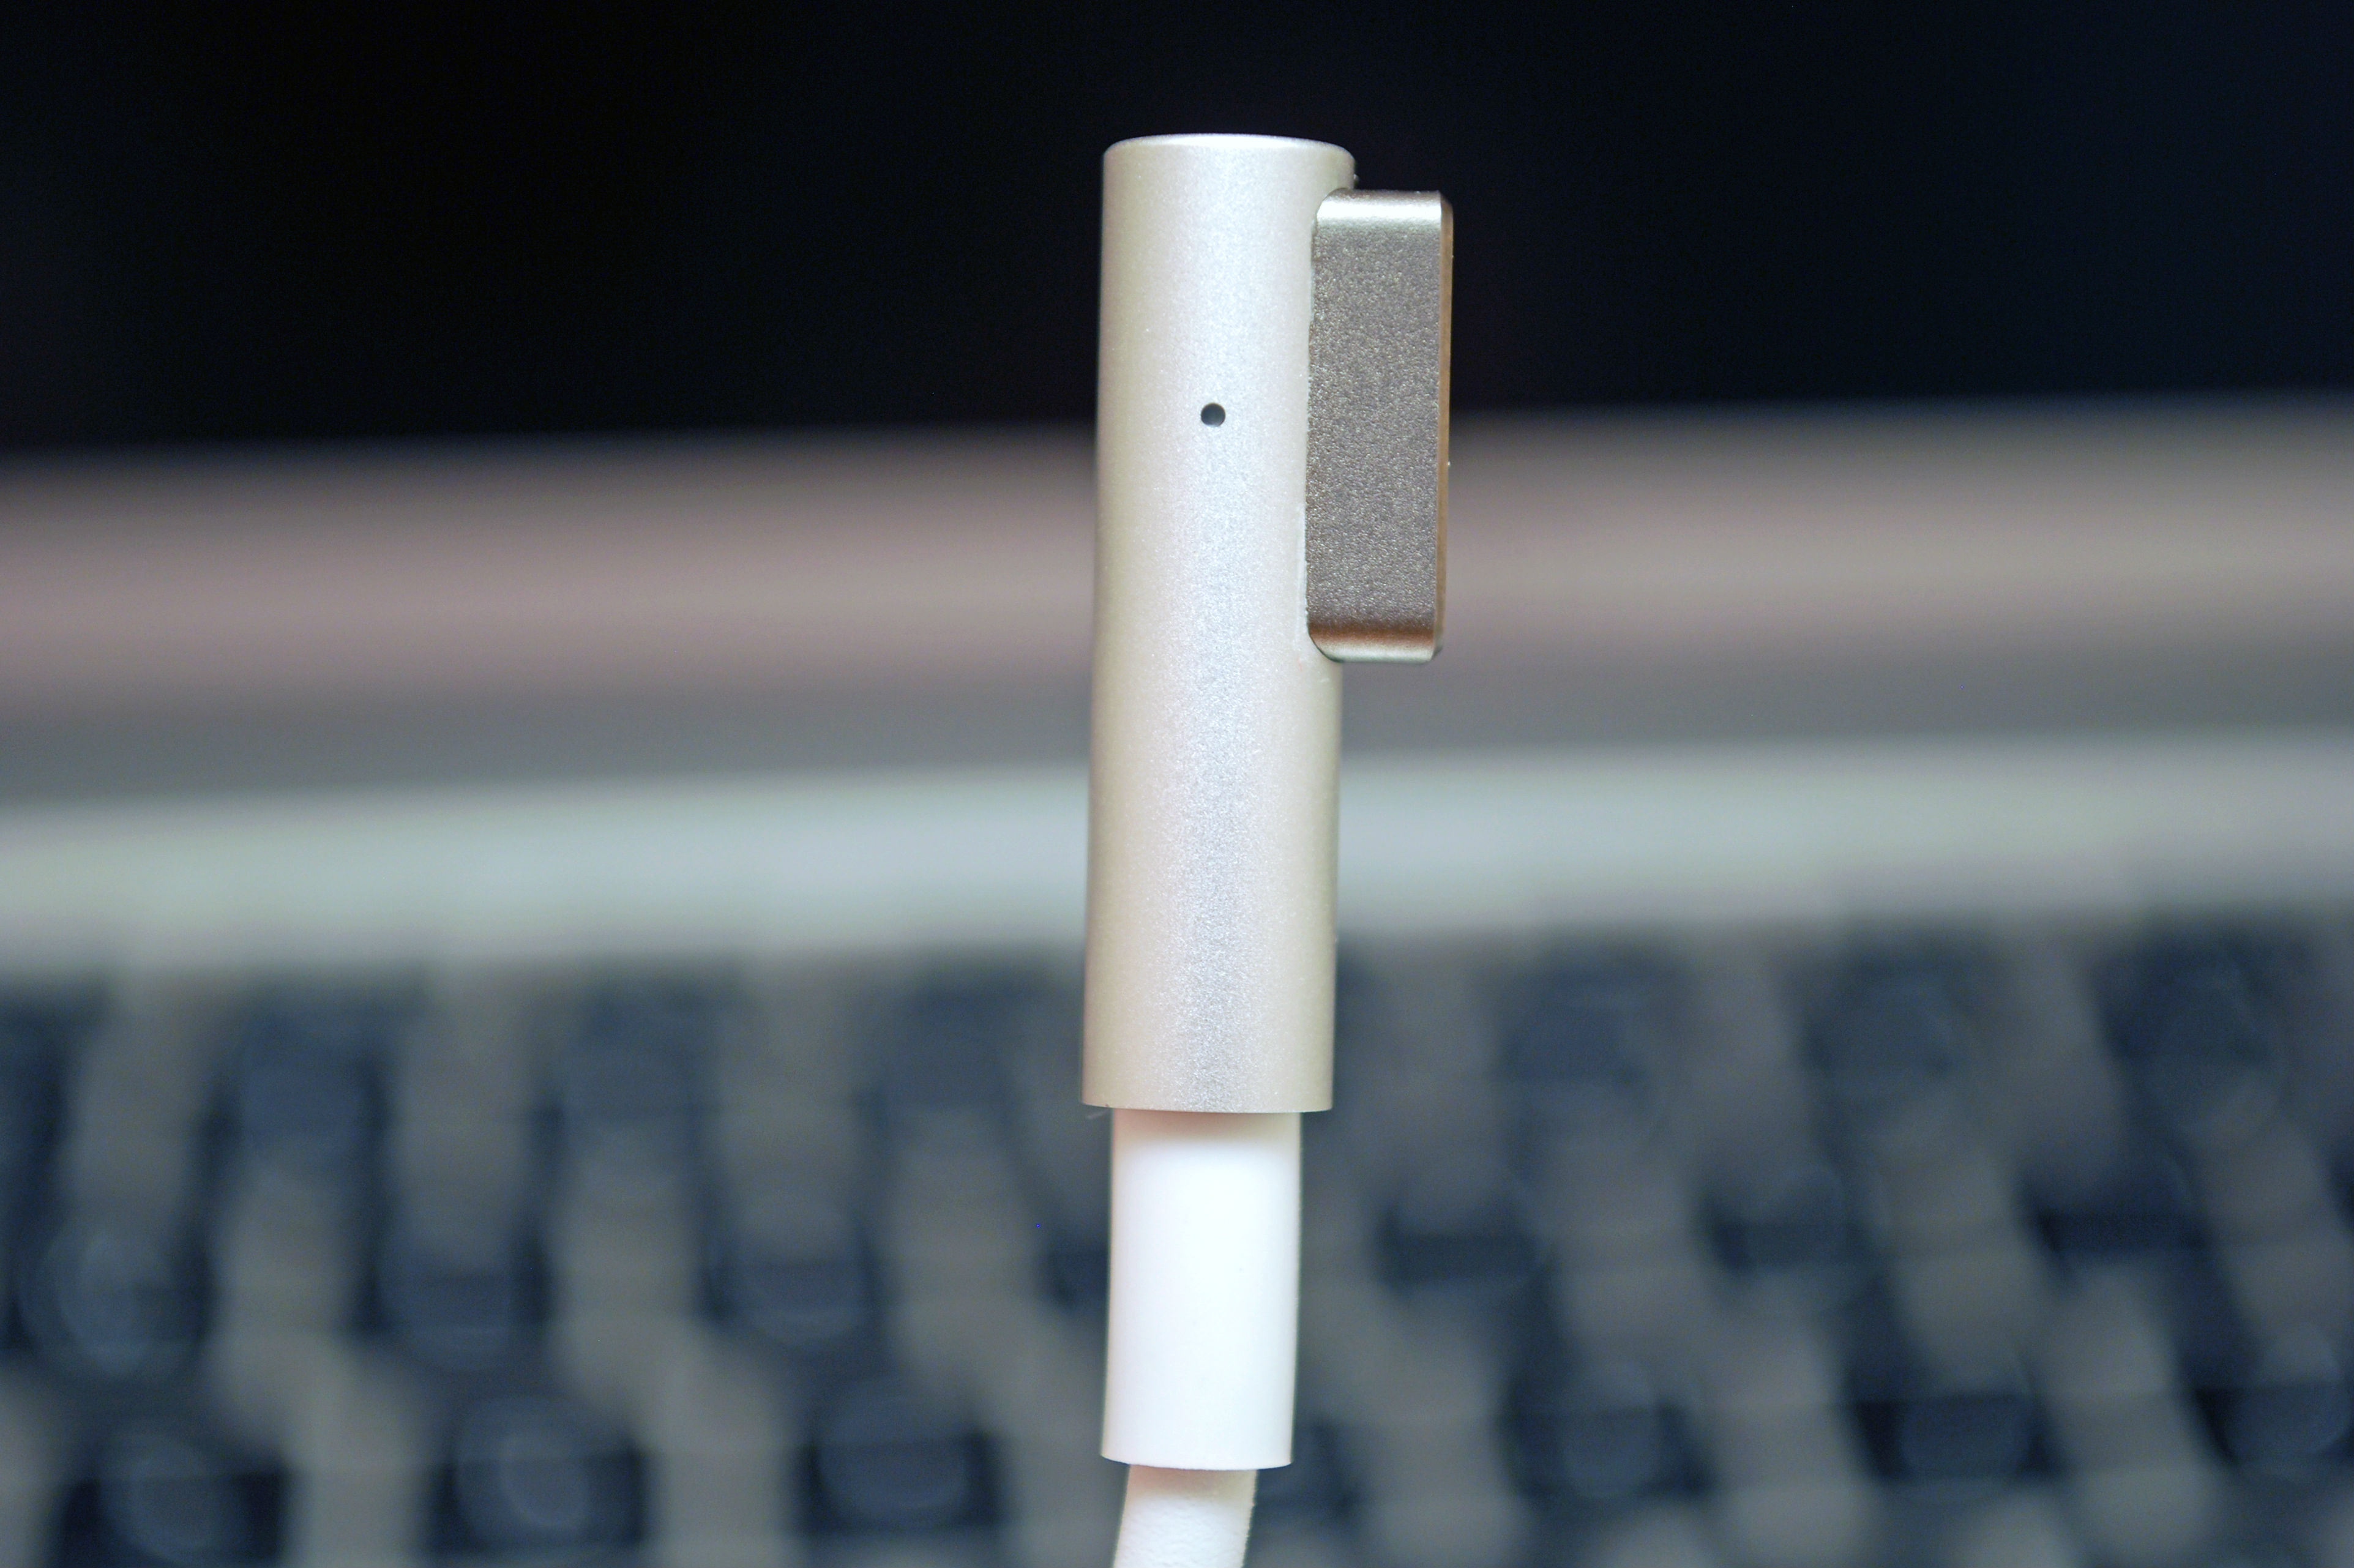 What You Should Do if Your MacBook Charger Stops Working | Digital Trends